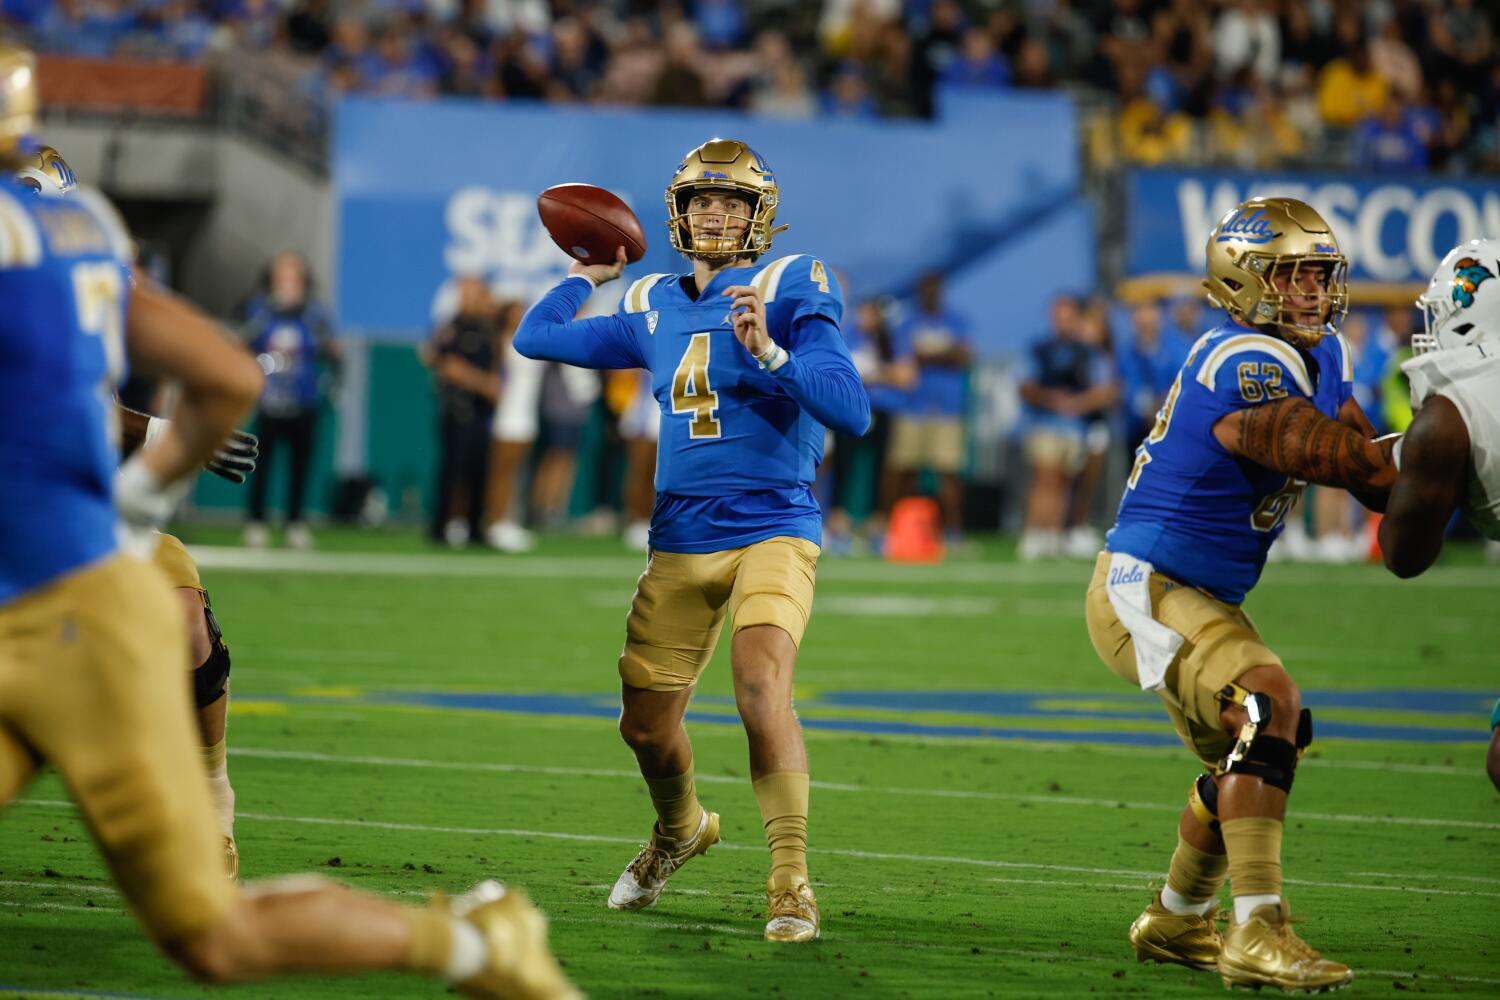 UCLA spring practice five things to watch: Can anyone challenge Ethan Garbers?